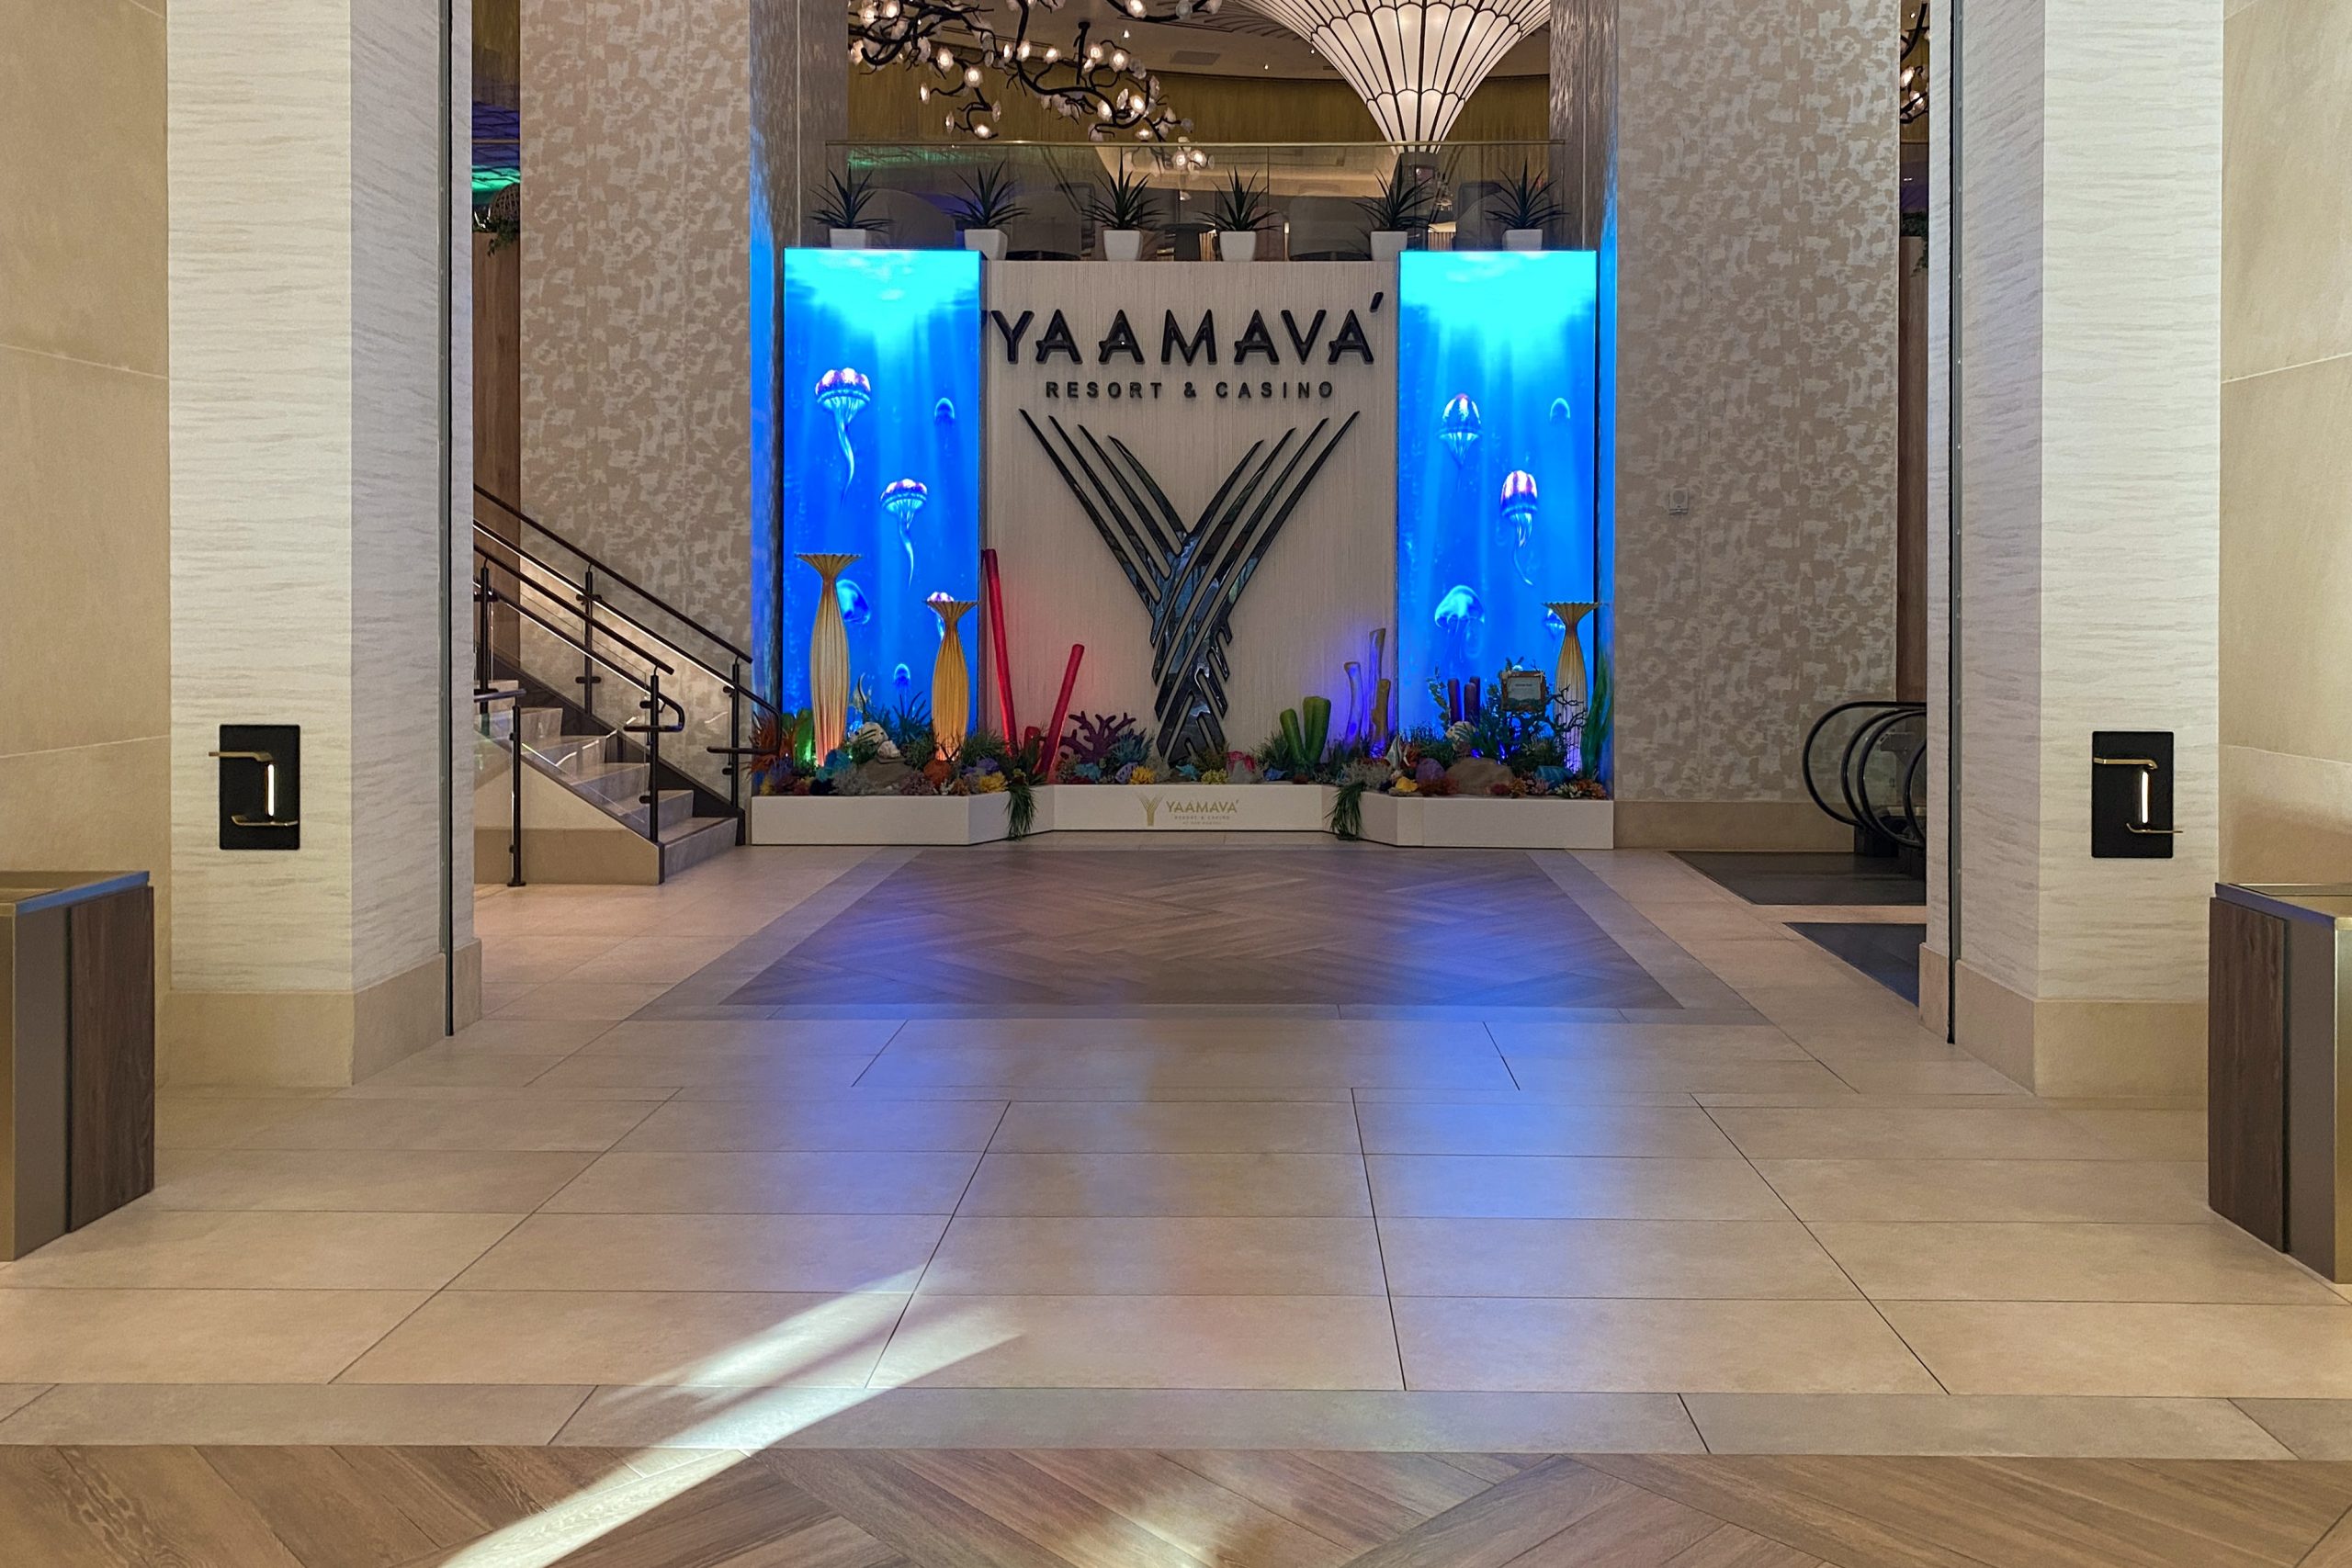 A grand entrance to the Yaamava Resort, featuring a luxurious building